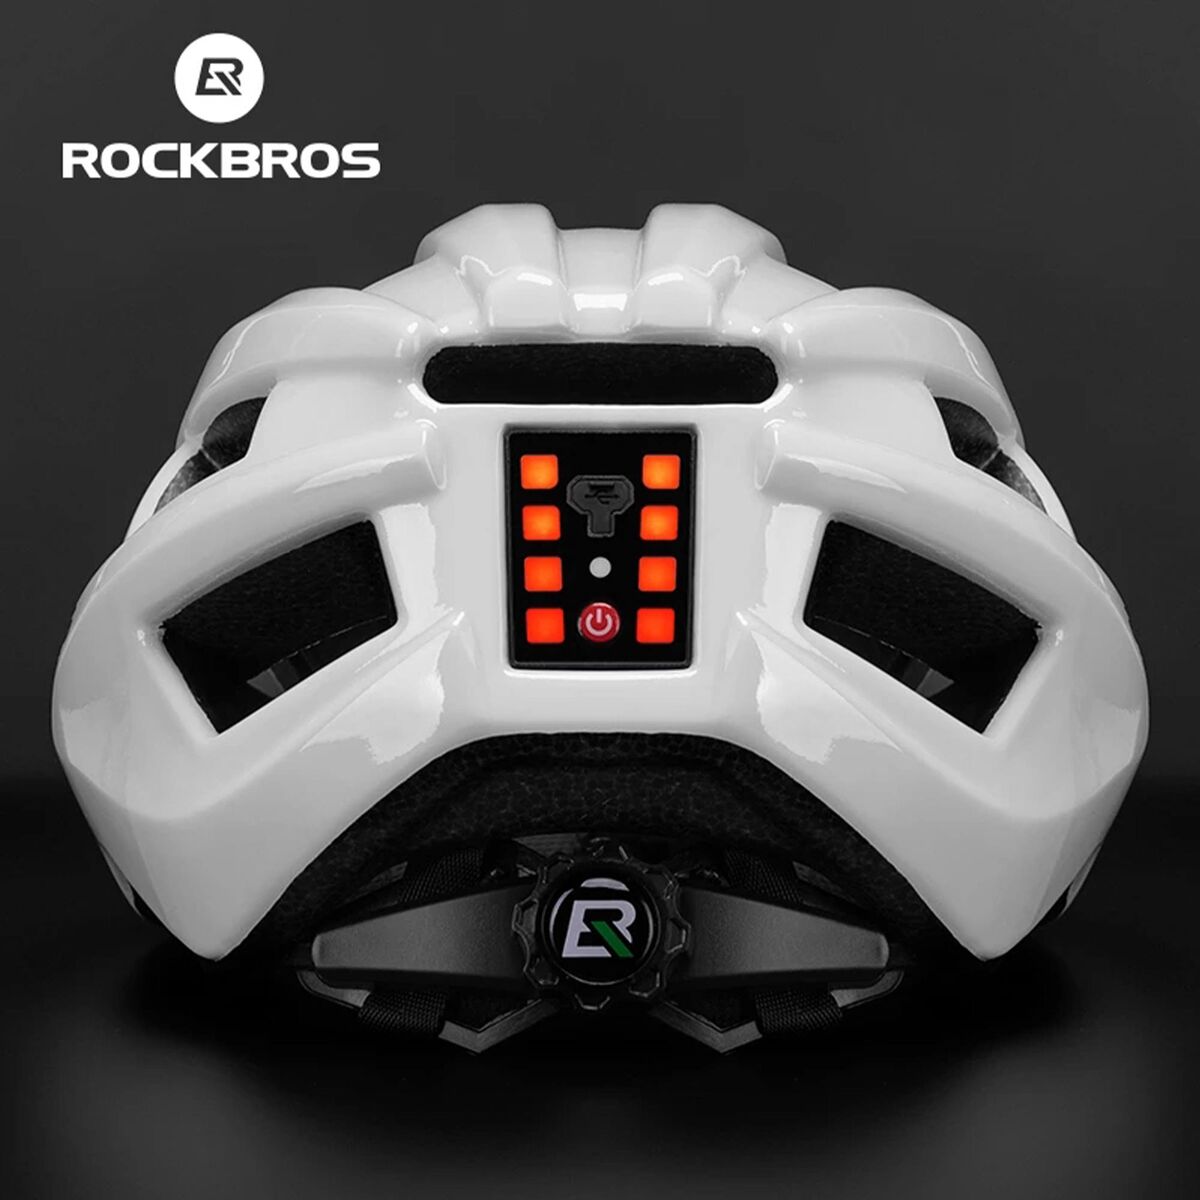 ROCKBROS Cycling Helmet With Tail Light ZK-013 White